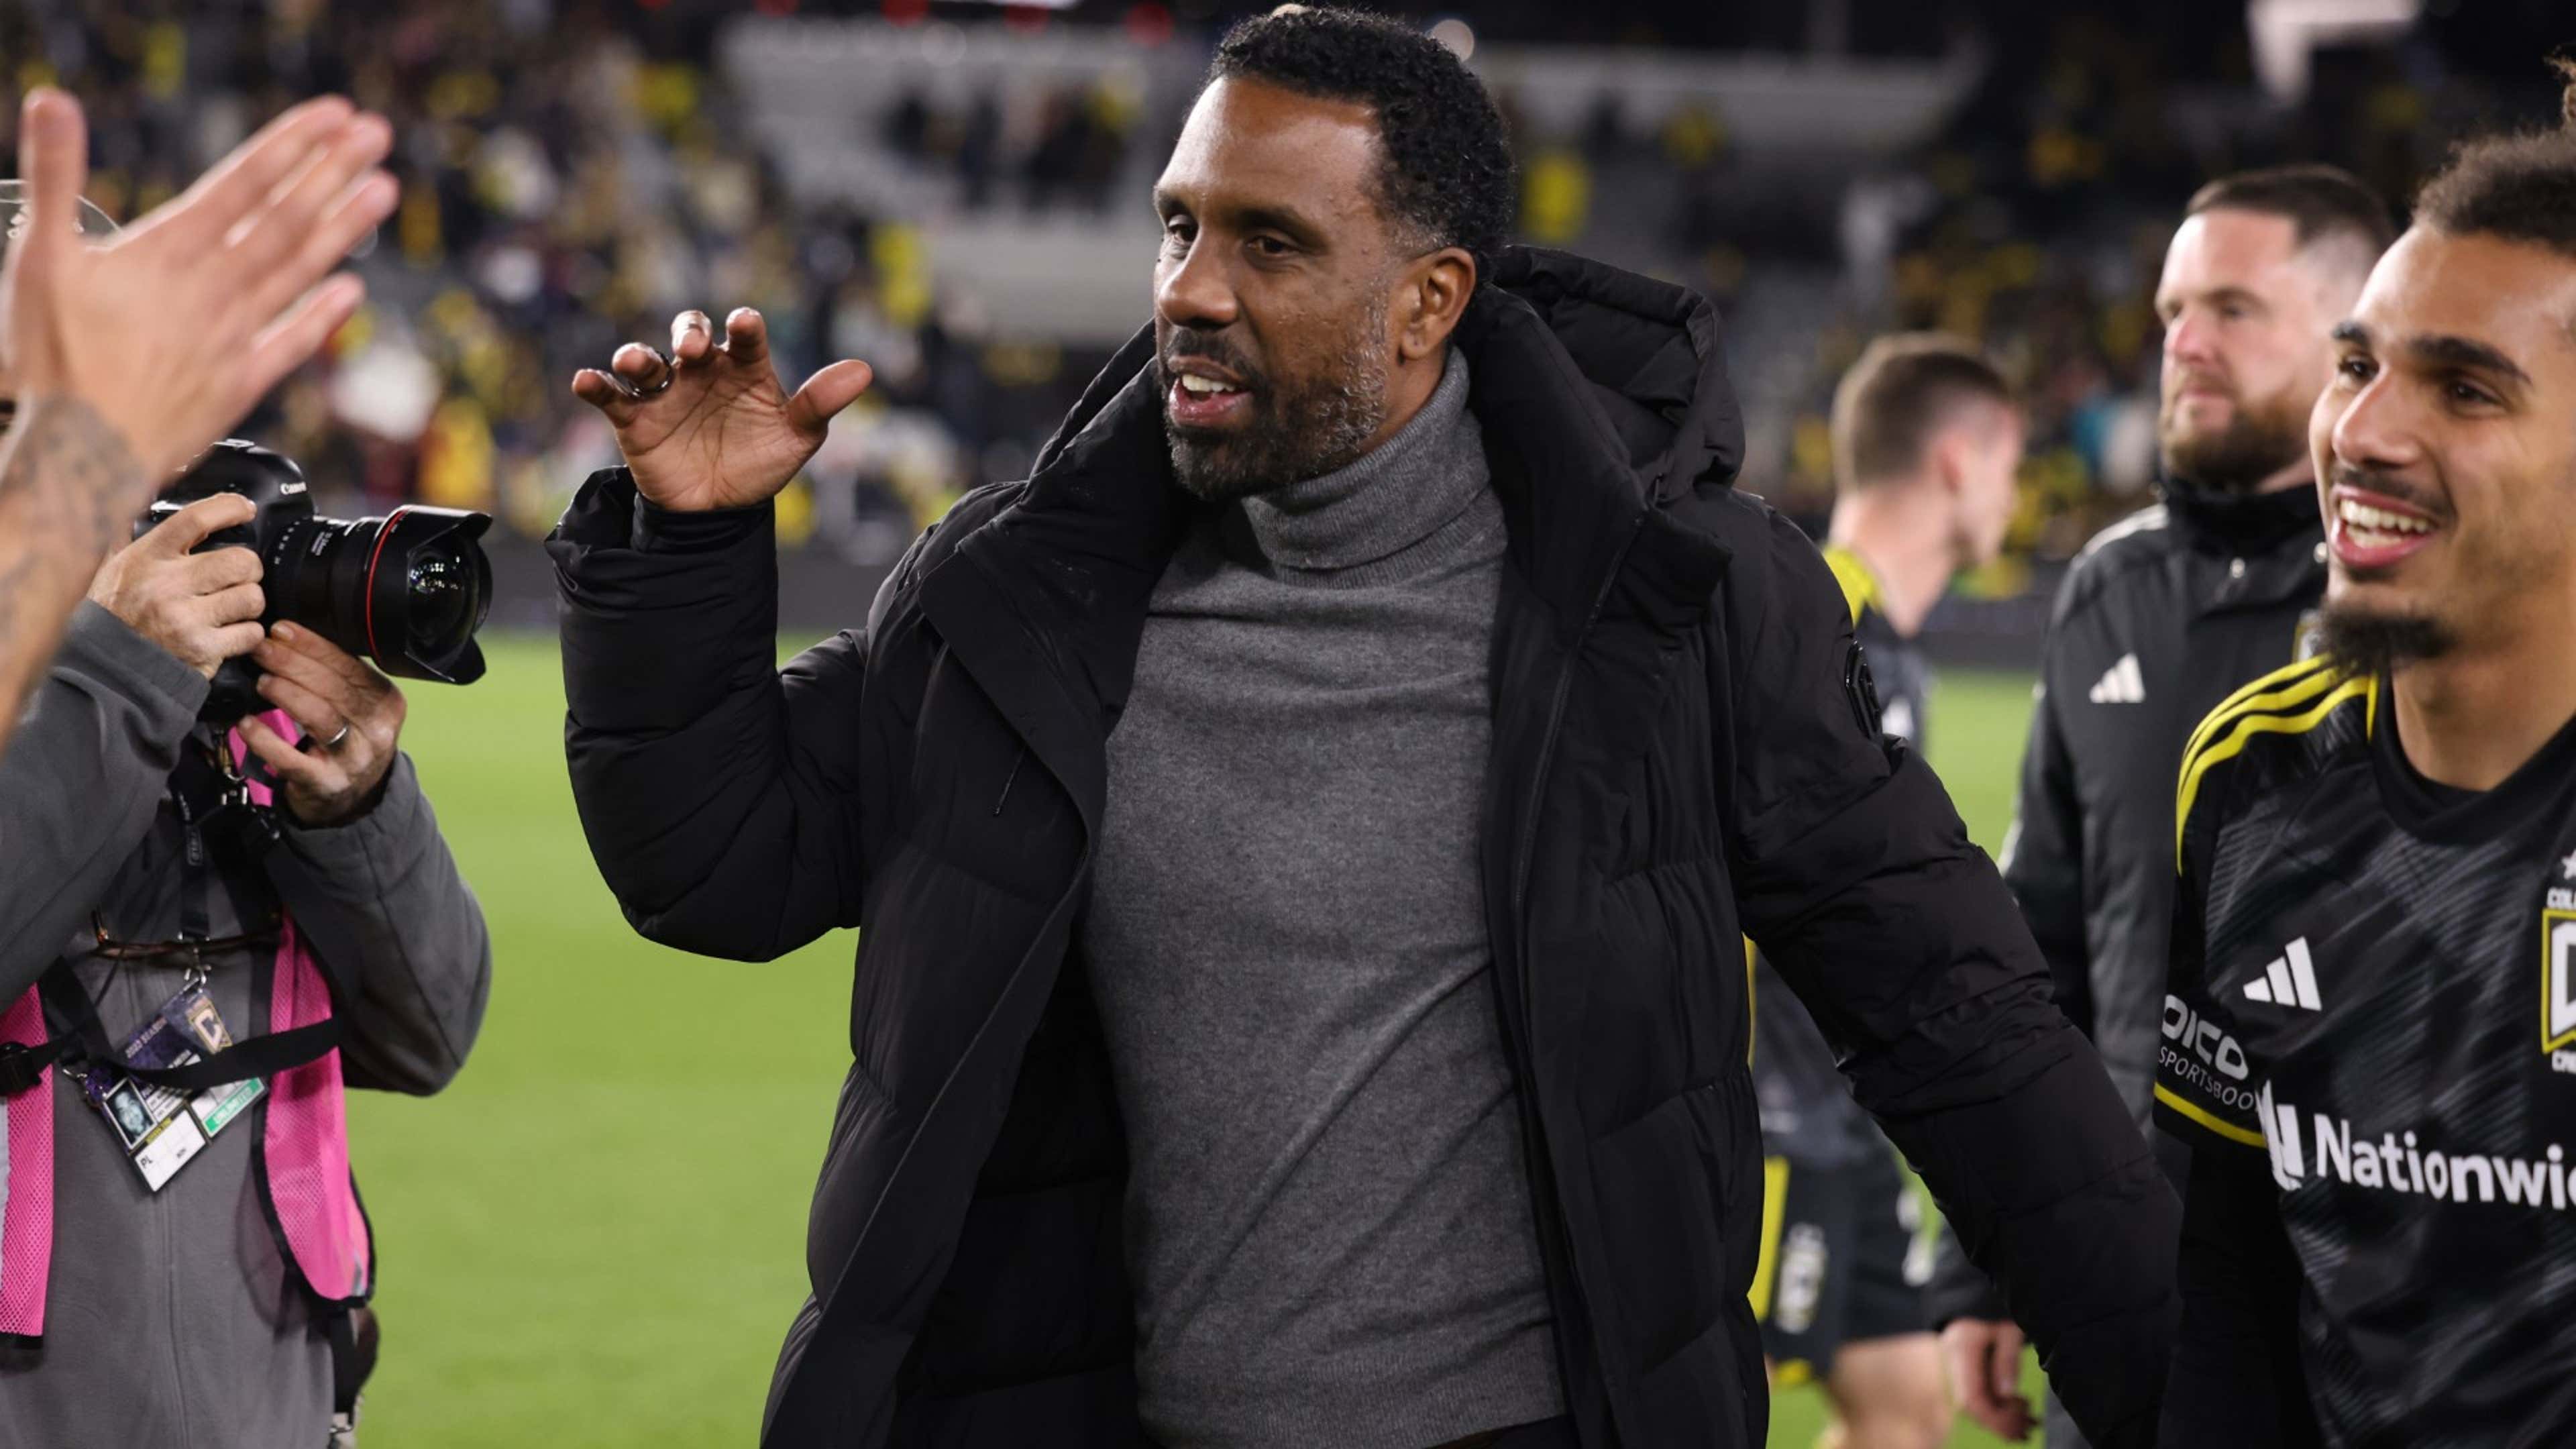 Wilfried Nancy first Black coach to win MLS Cup: I'm so proud